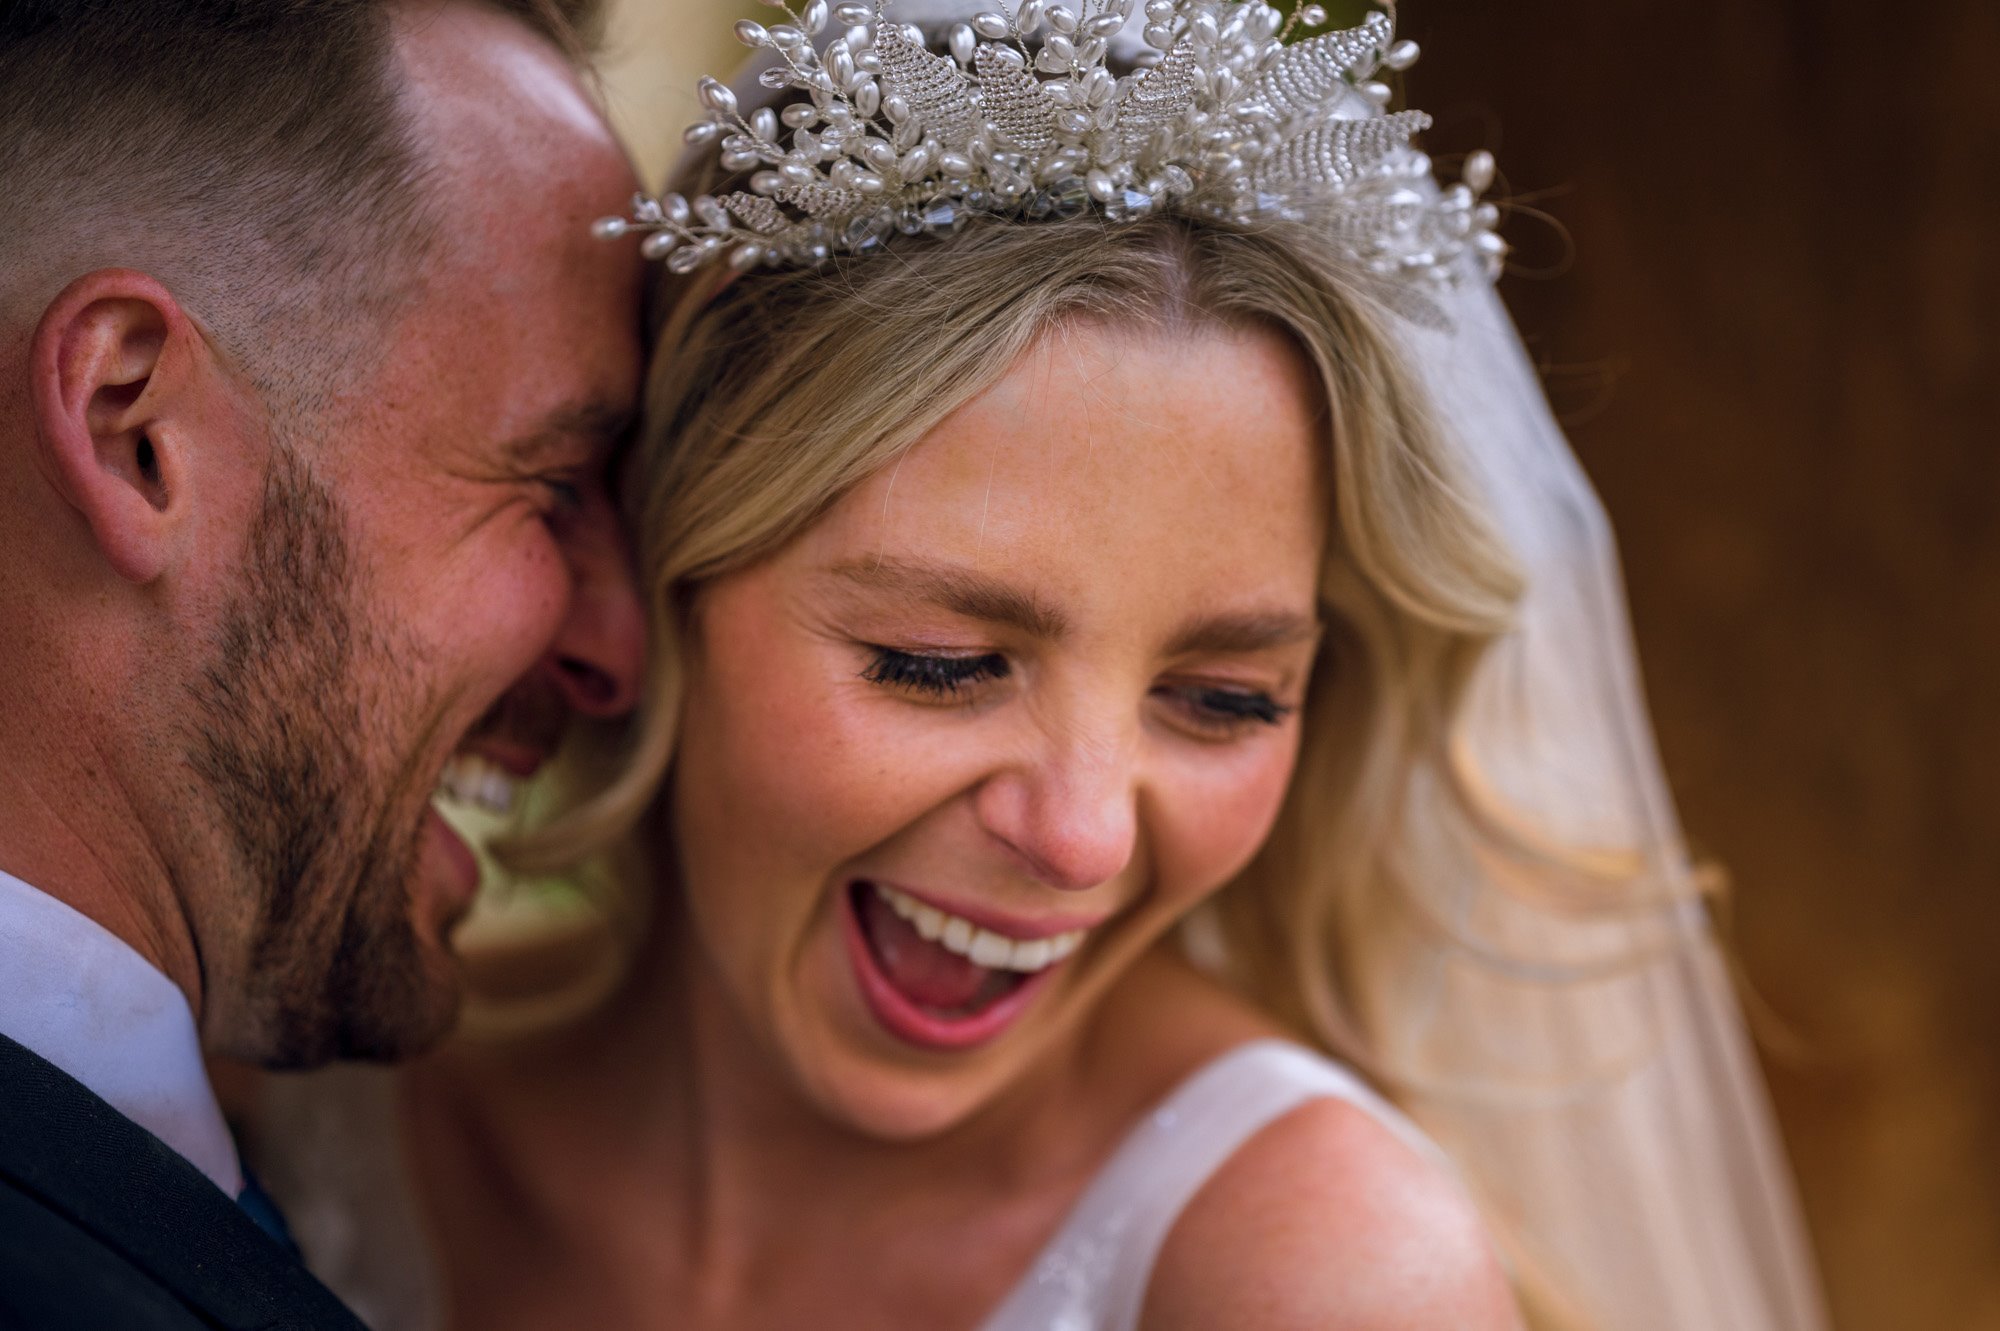 Boho bride in stunning pearl crown and veil laughs as her groom presses face against her face and laughs with her